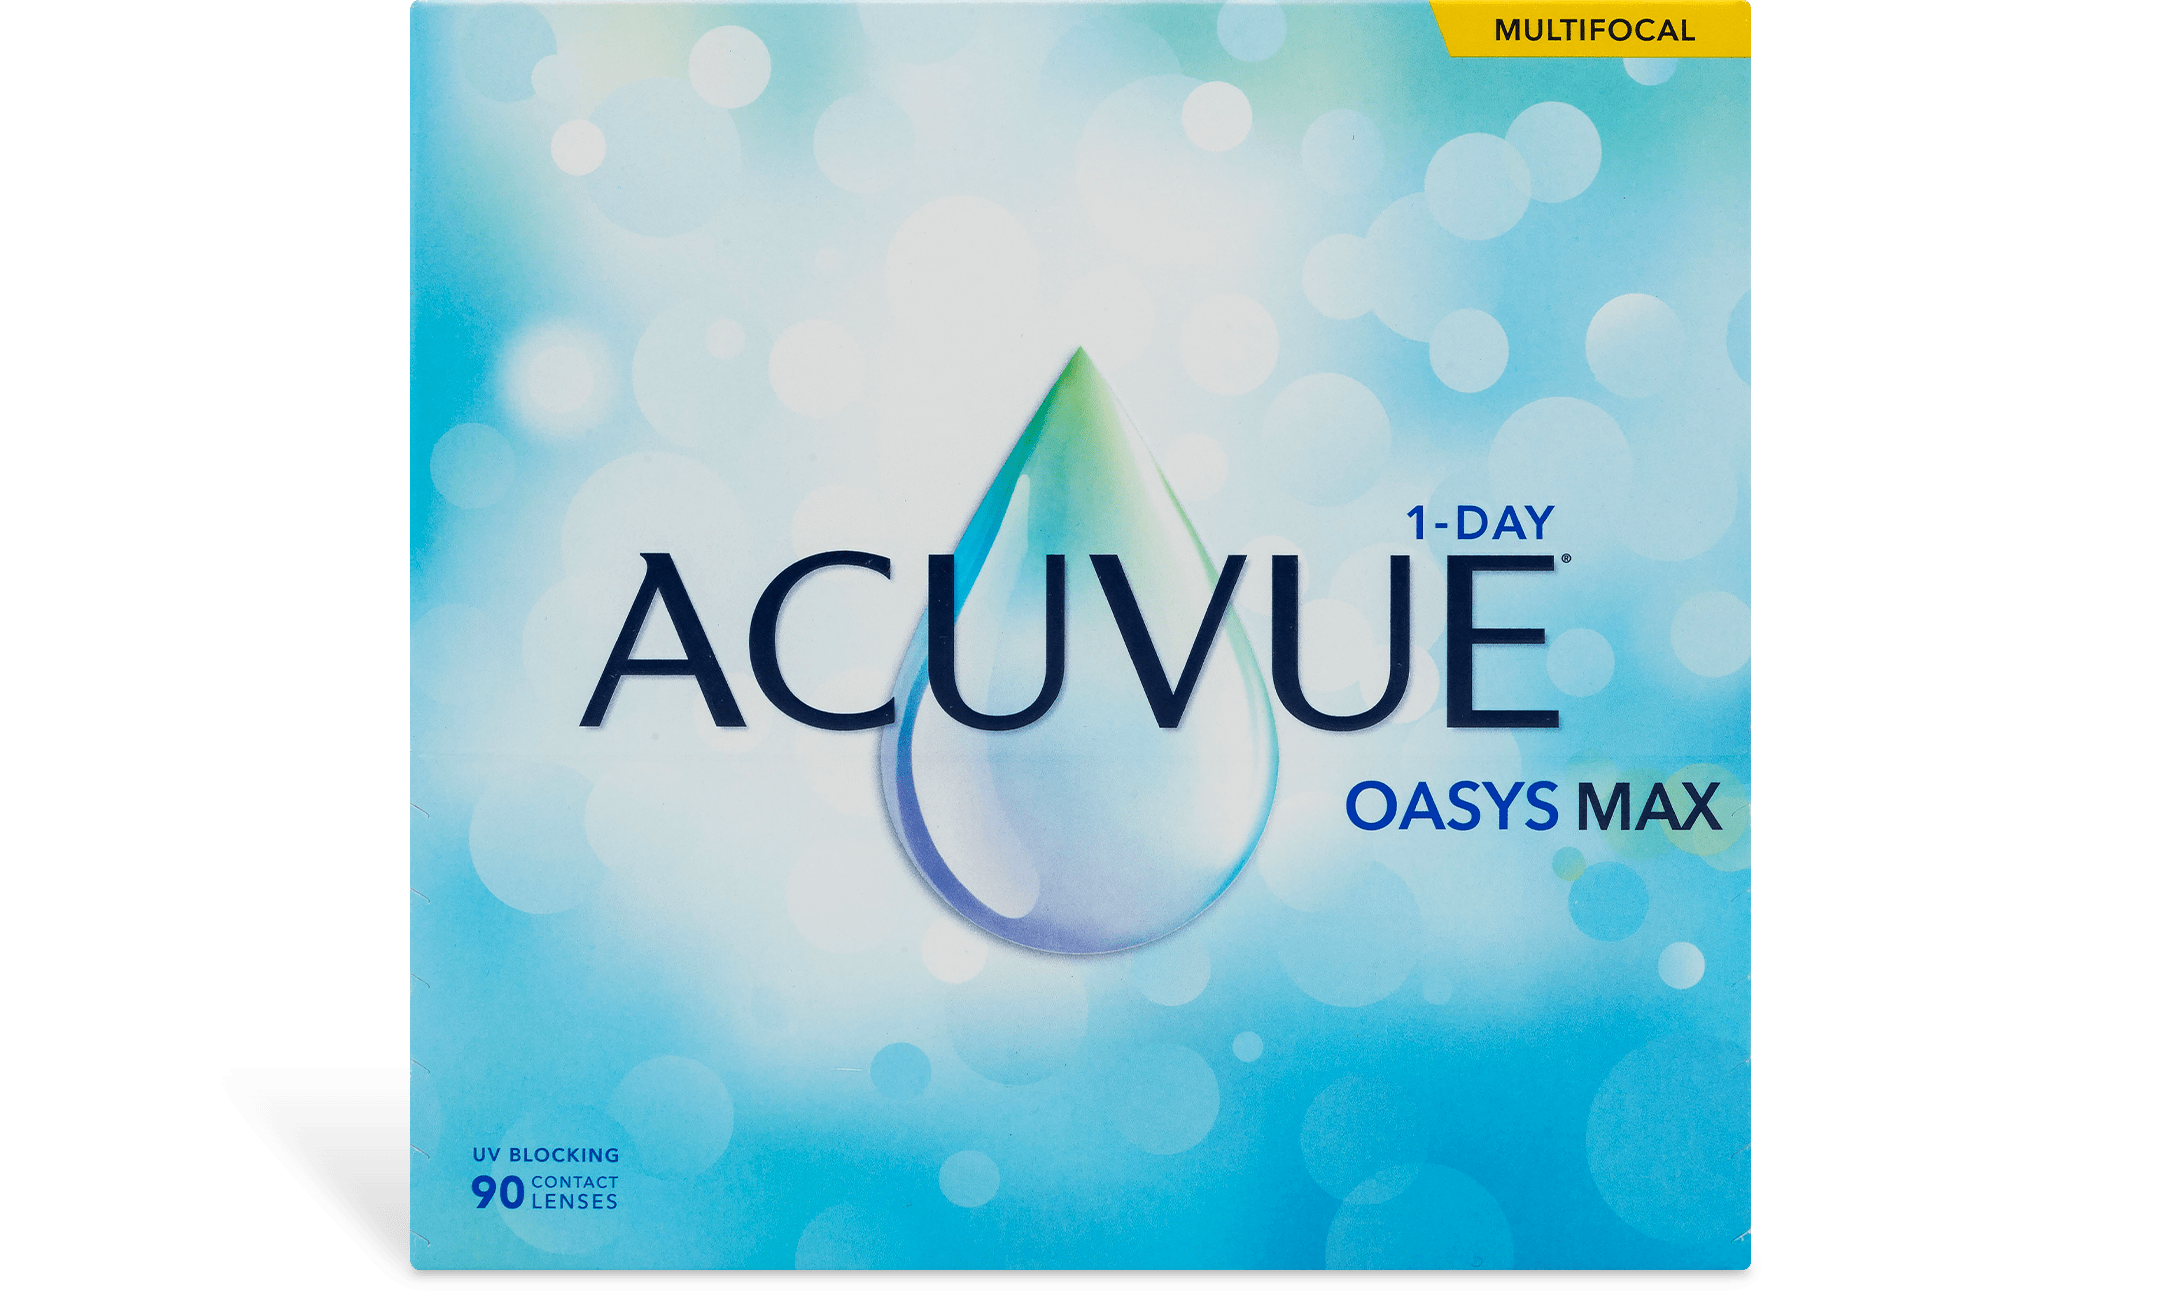 acuvue-oasys-max-1-day-multifocal-contact-lenses-1-800-contacts